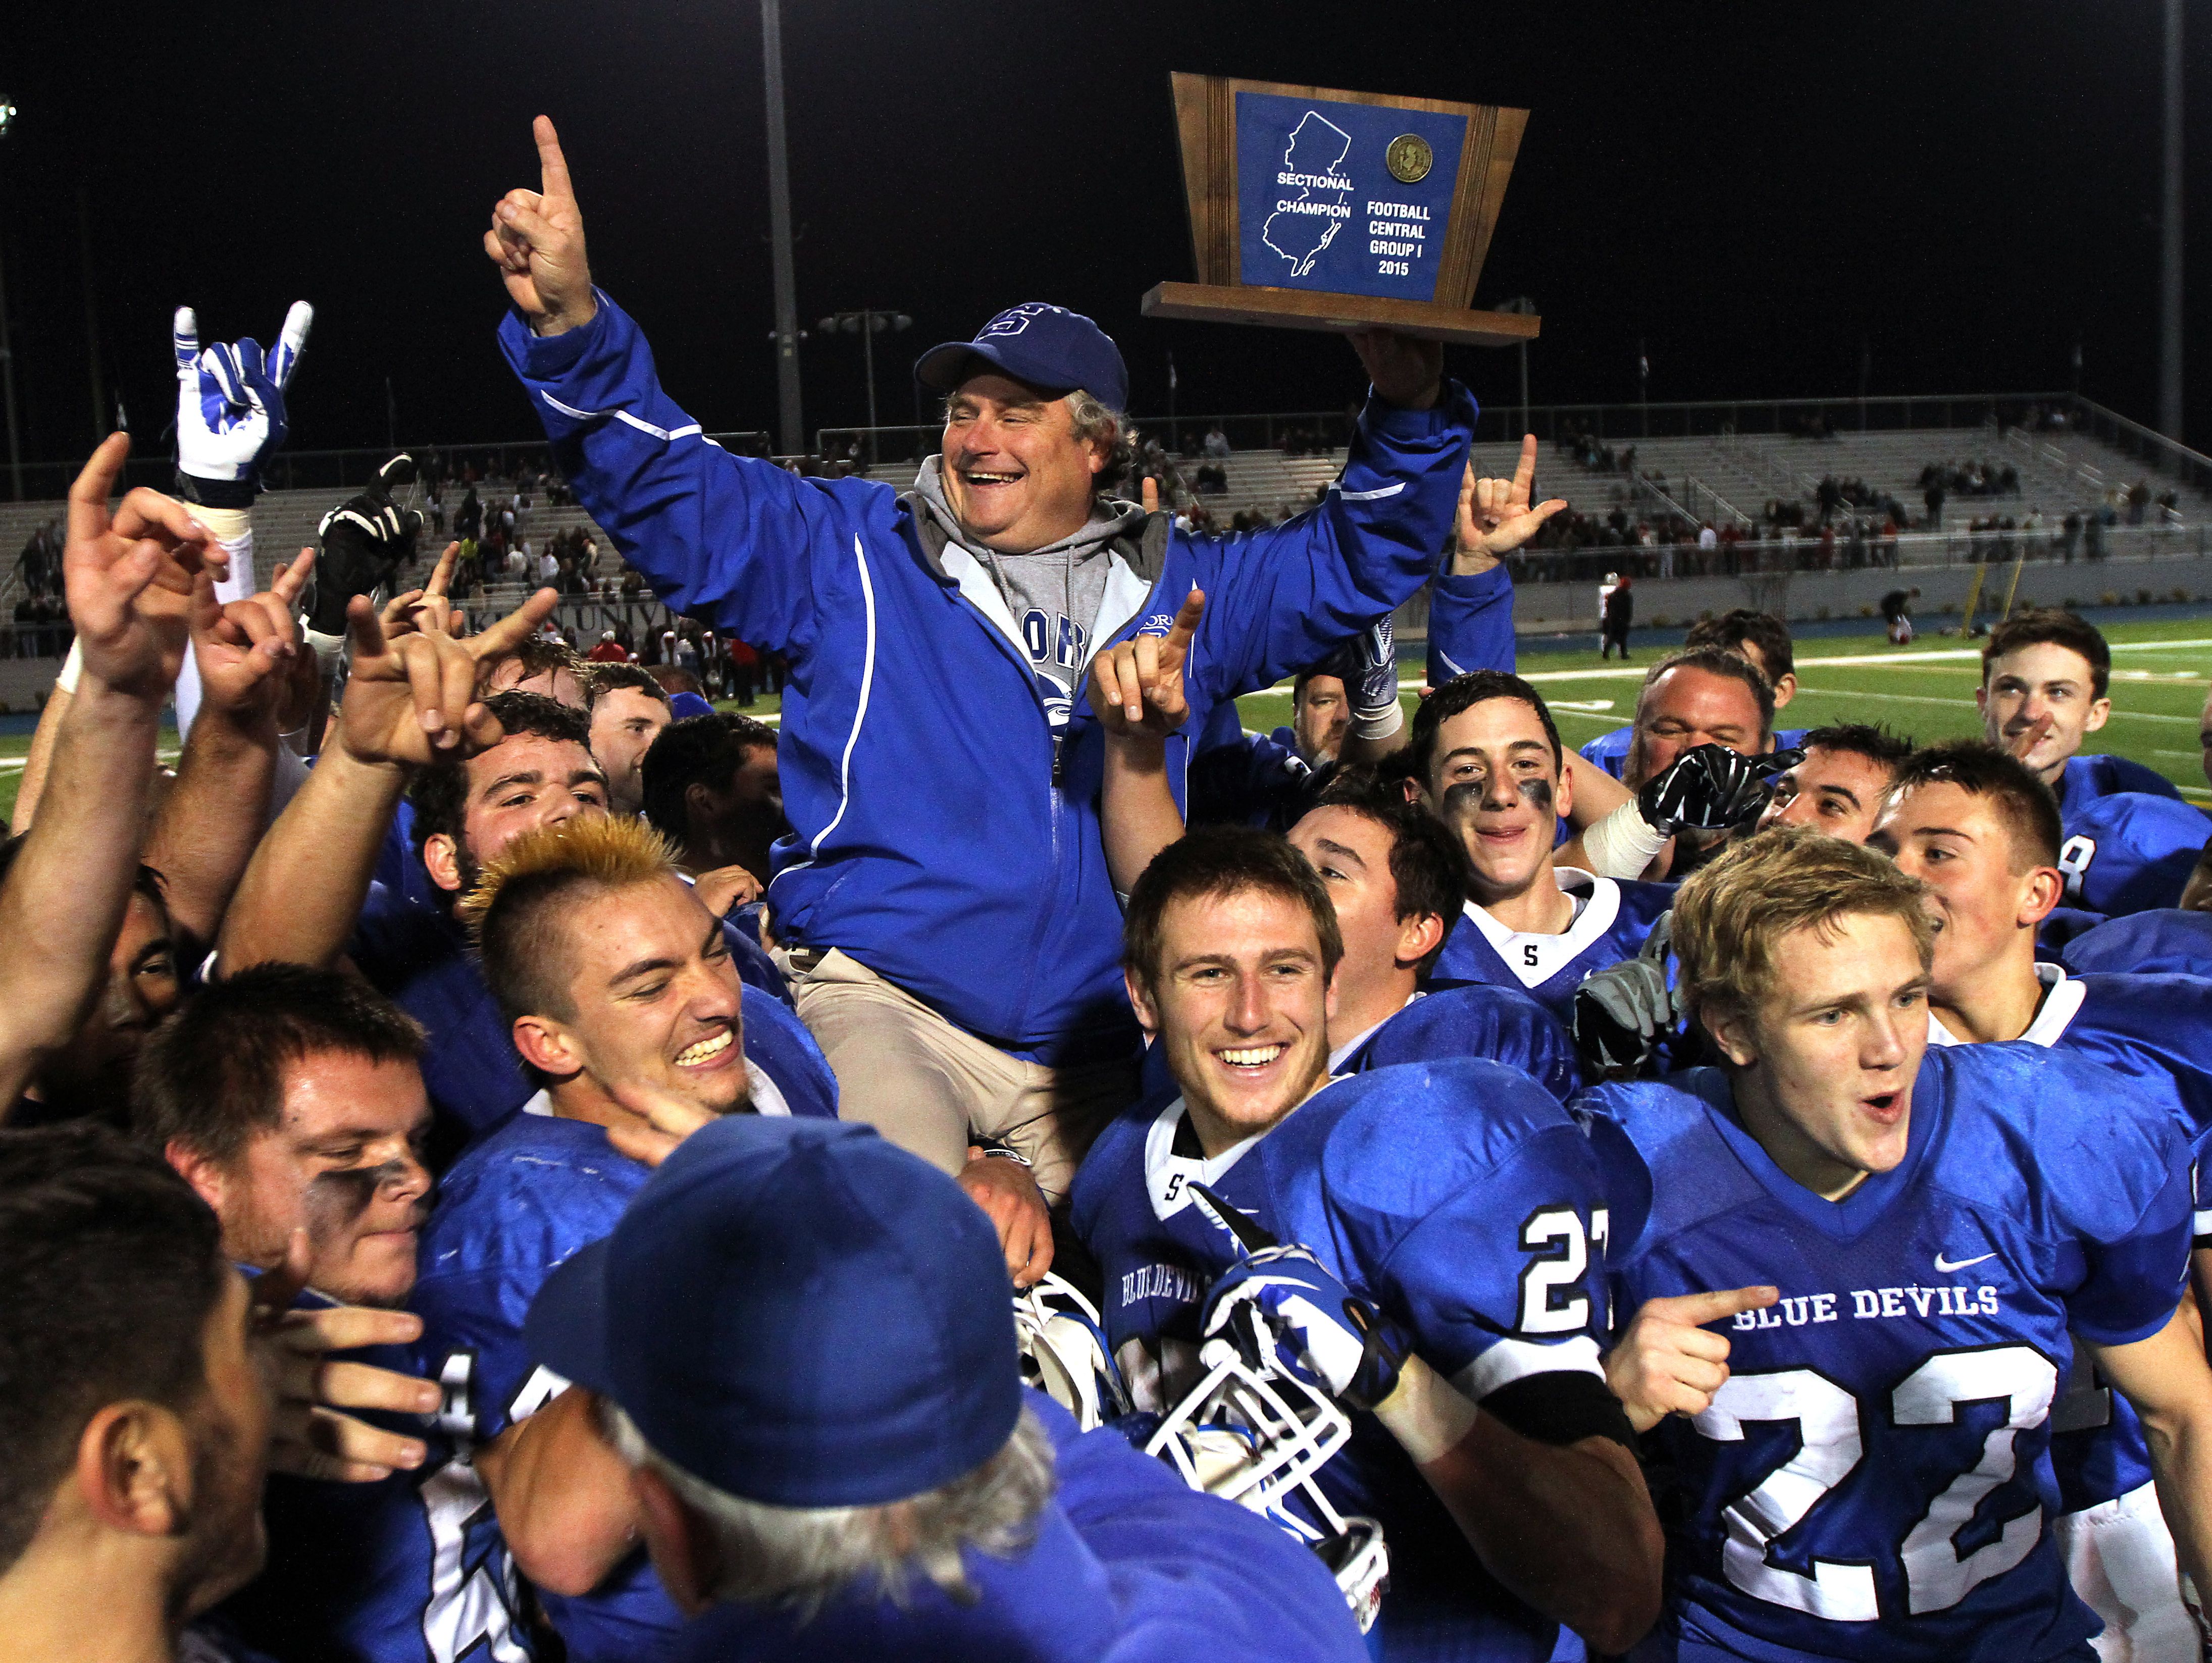 Shore Regional players hoist head coach Mark Costantino after the Blue Devils beat Palmyra in the NJSIAA Central Group I championship game last Saturday.